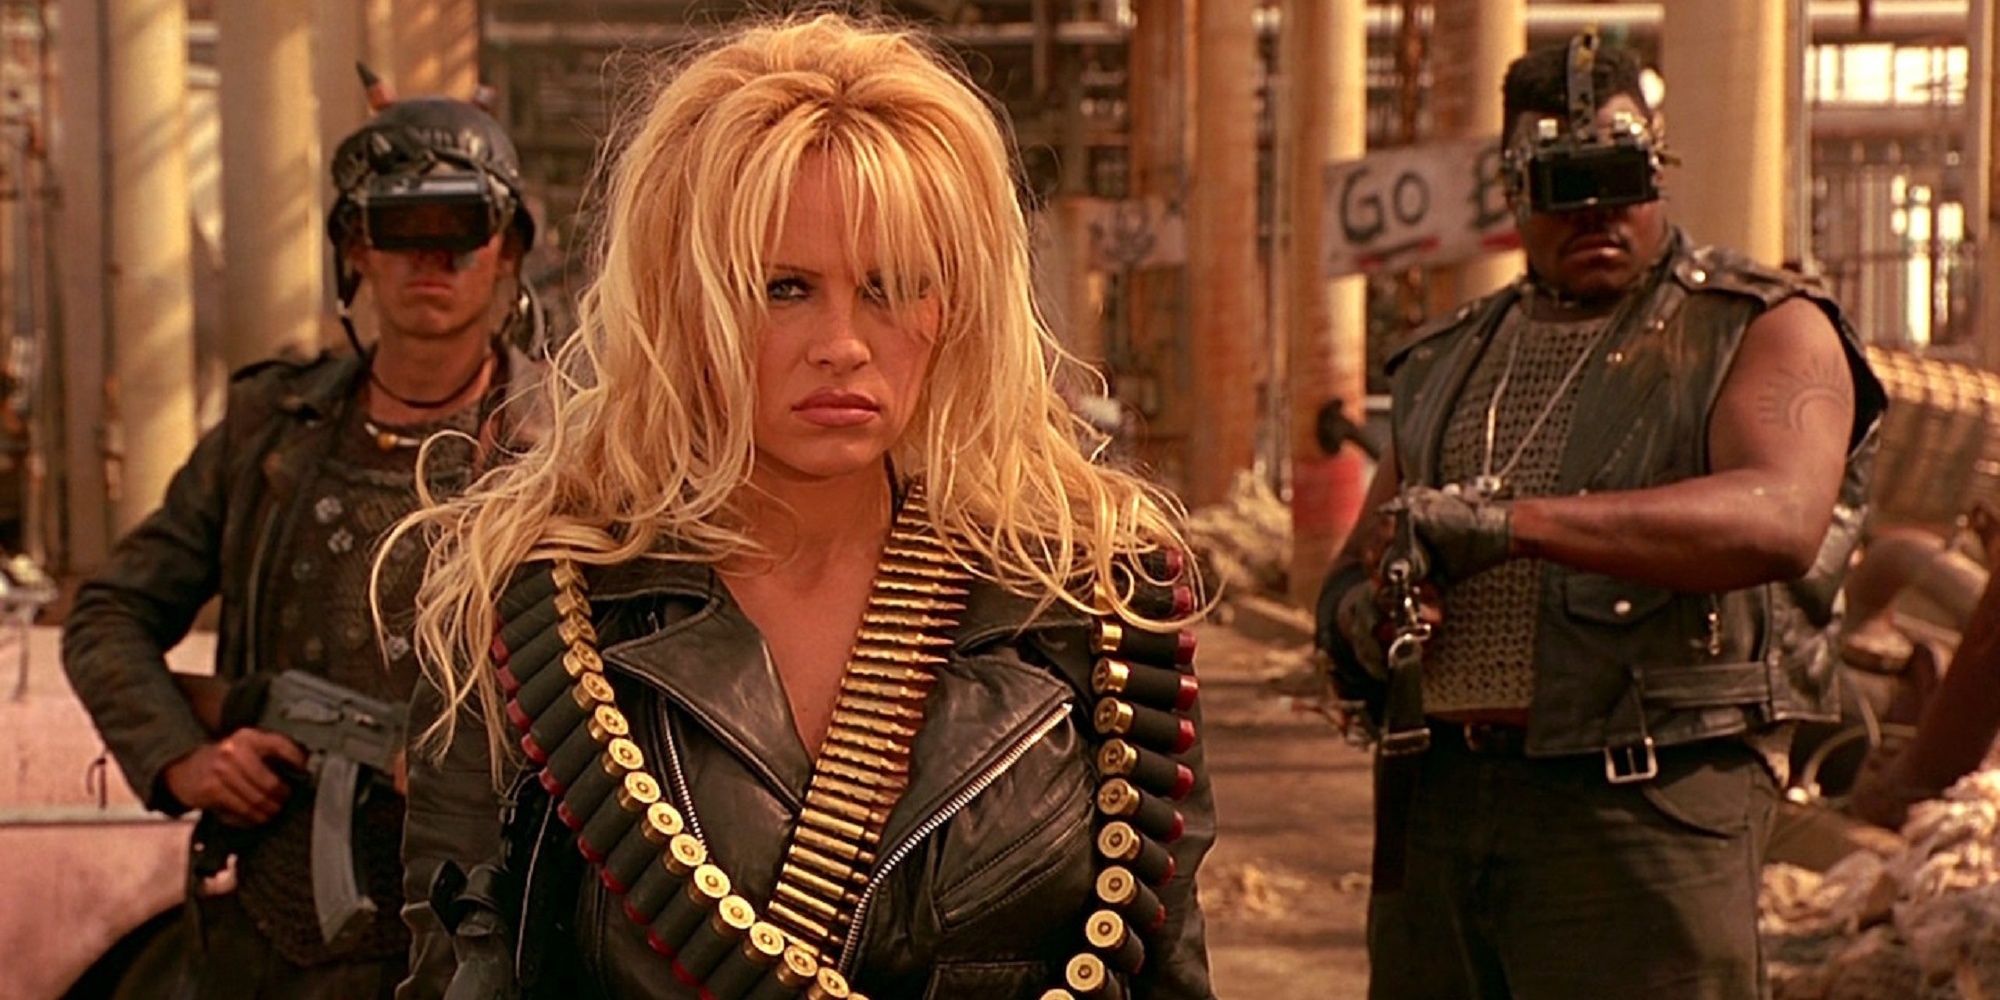 Barb Wire staring the baddies down in a leather jacket.